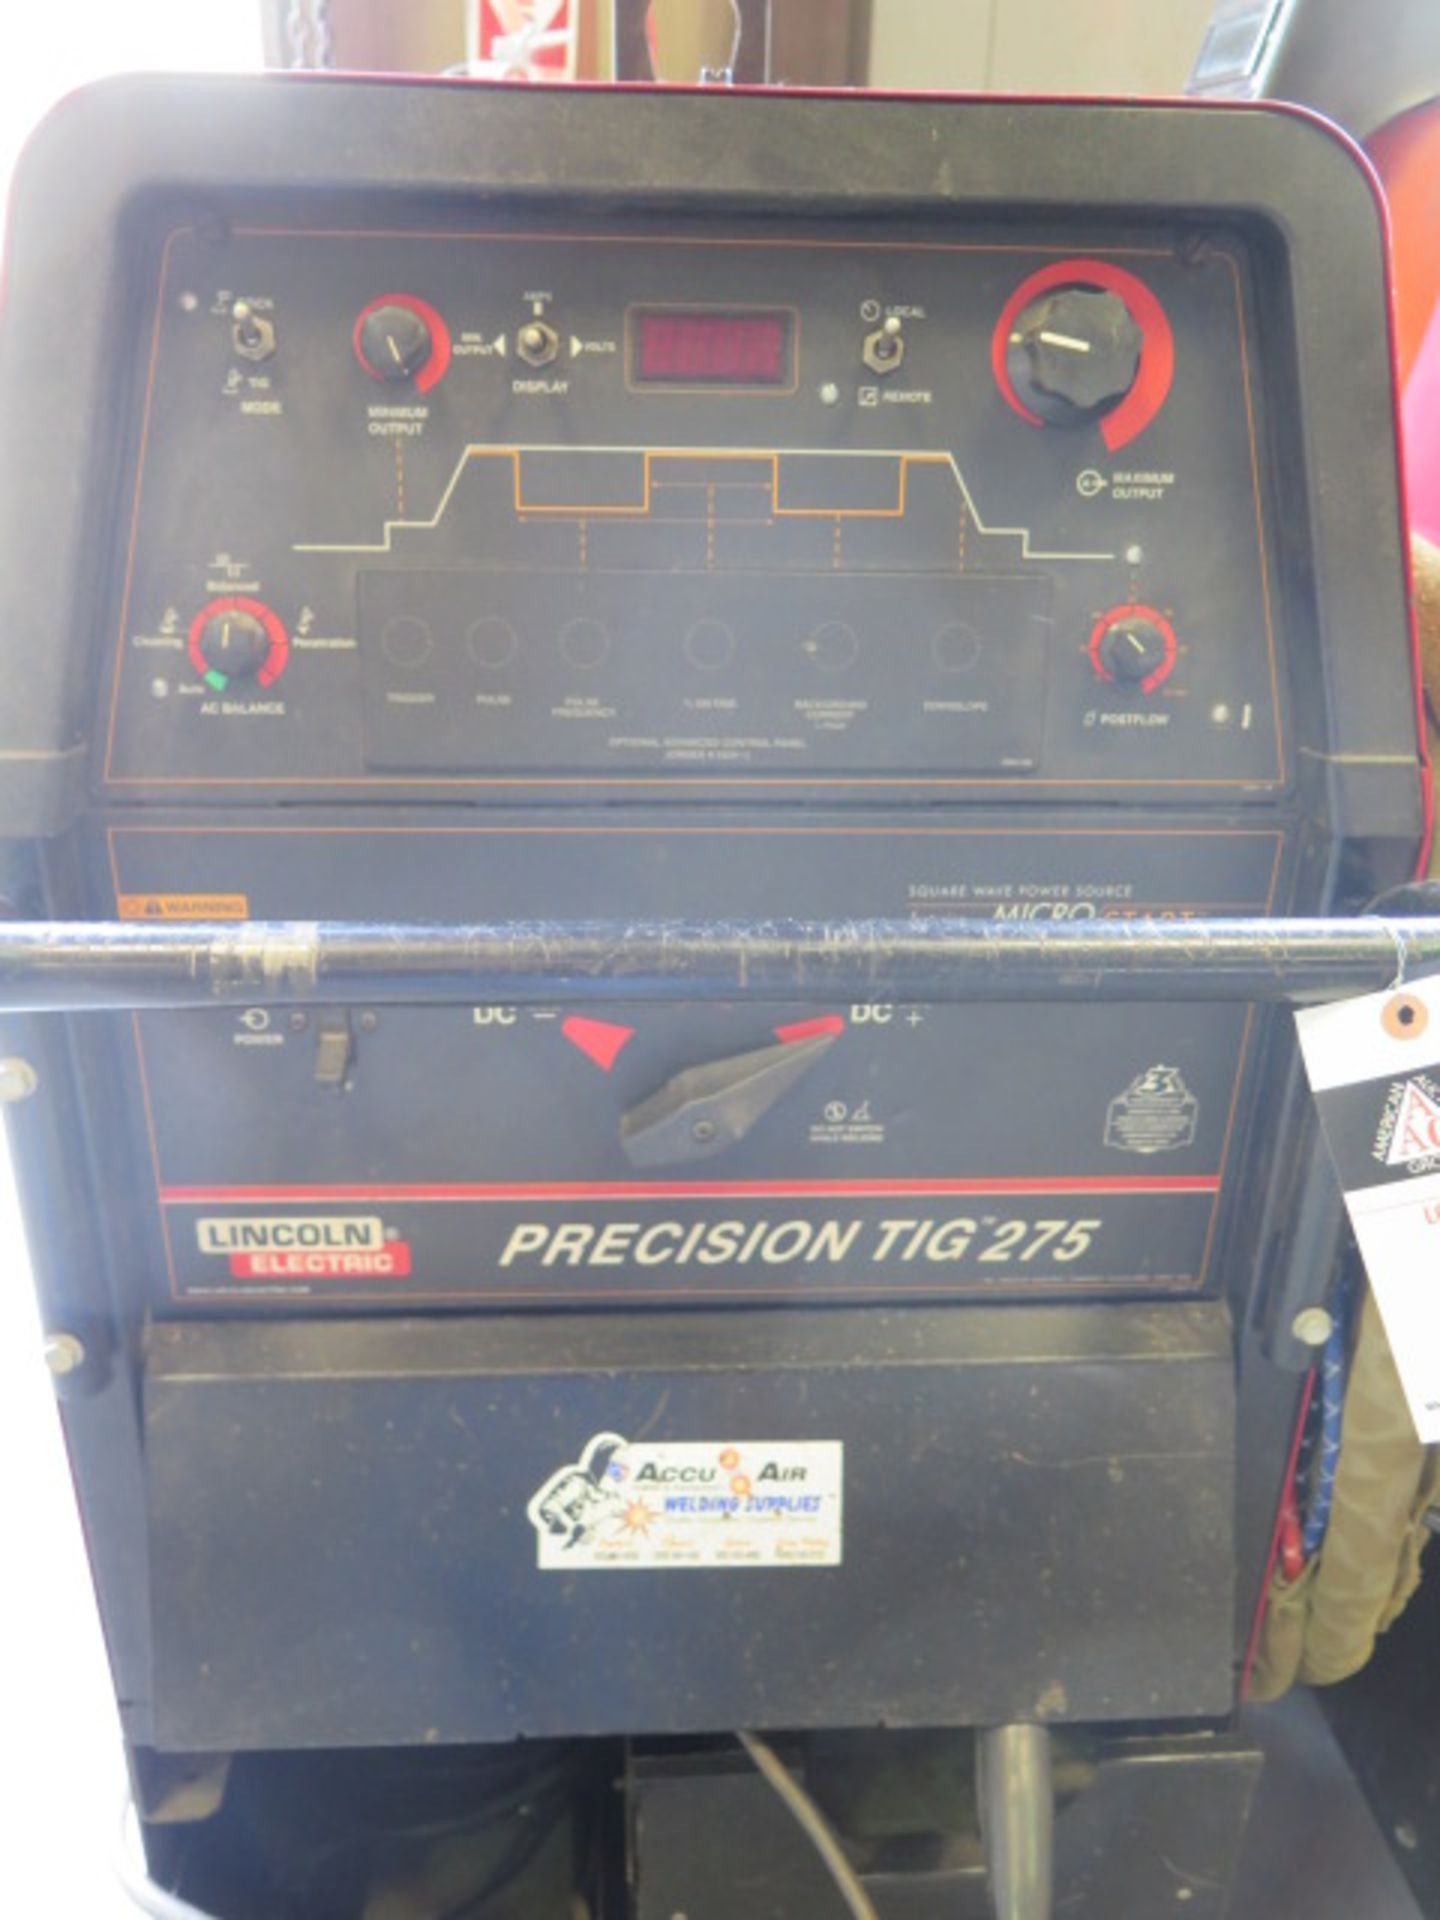 Lincoln Precision TIG275 AC/DC Square Wave Power Source s/n U1040624287 w/ Micro-Start - Image 4 of 7